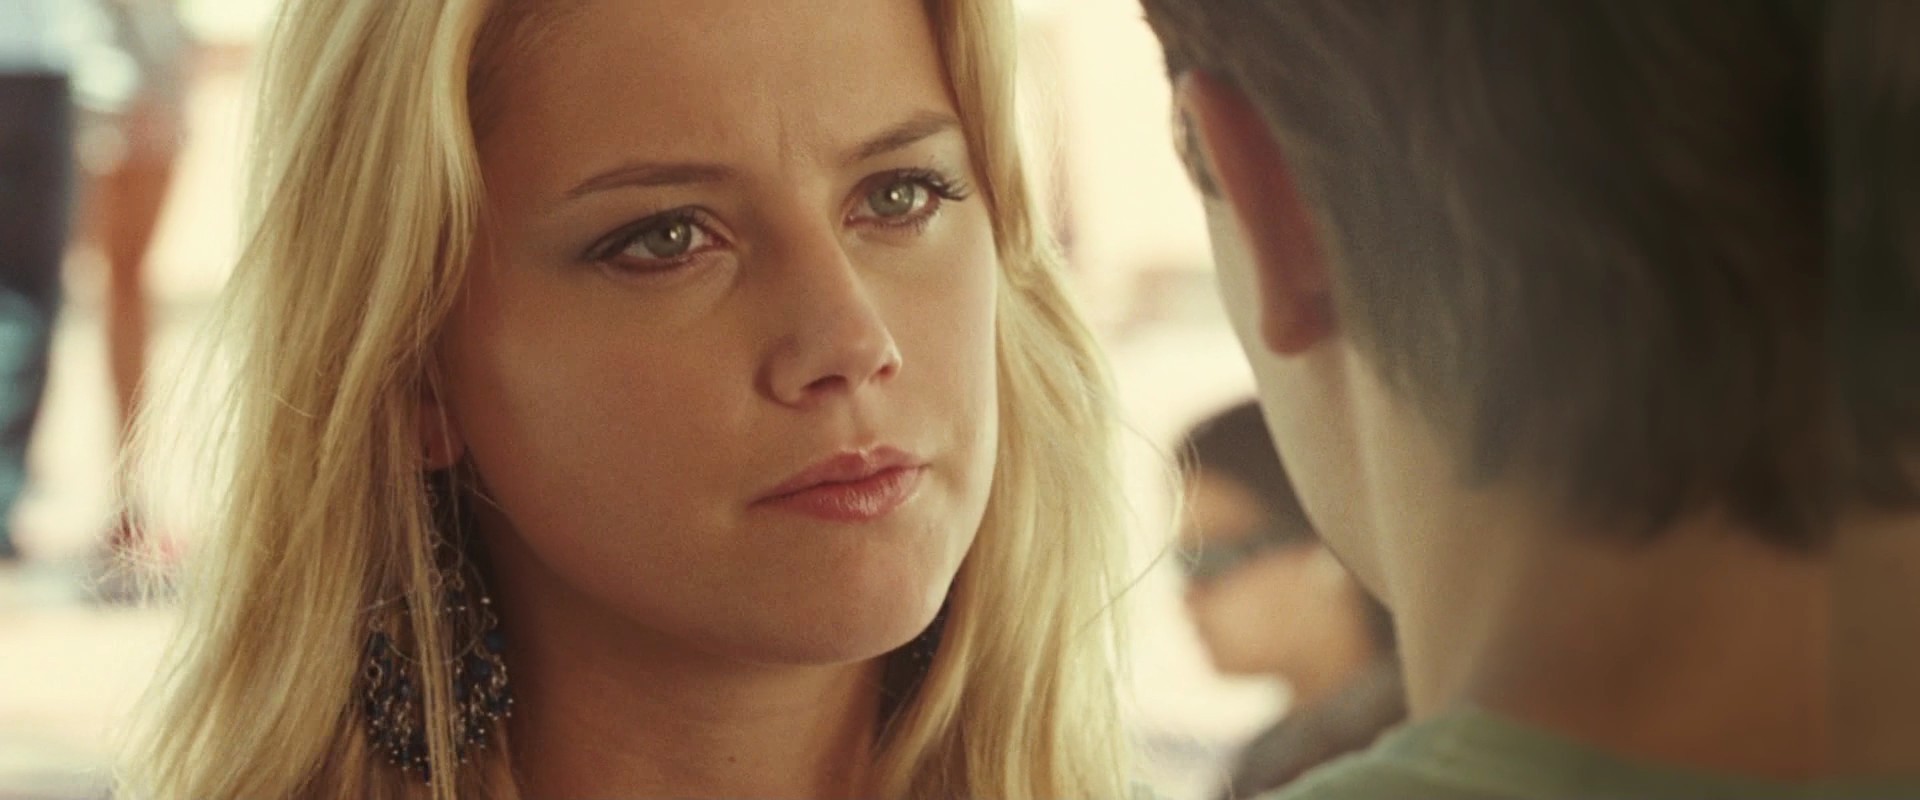 Image of Never Back Down for fans of Amber Heard. 